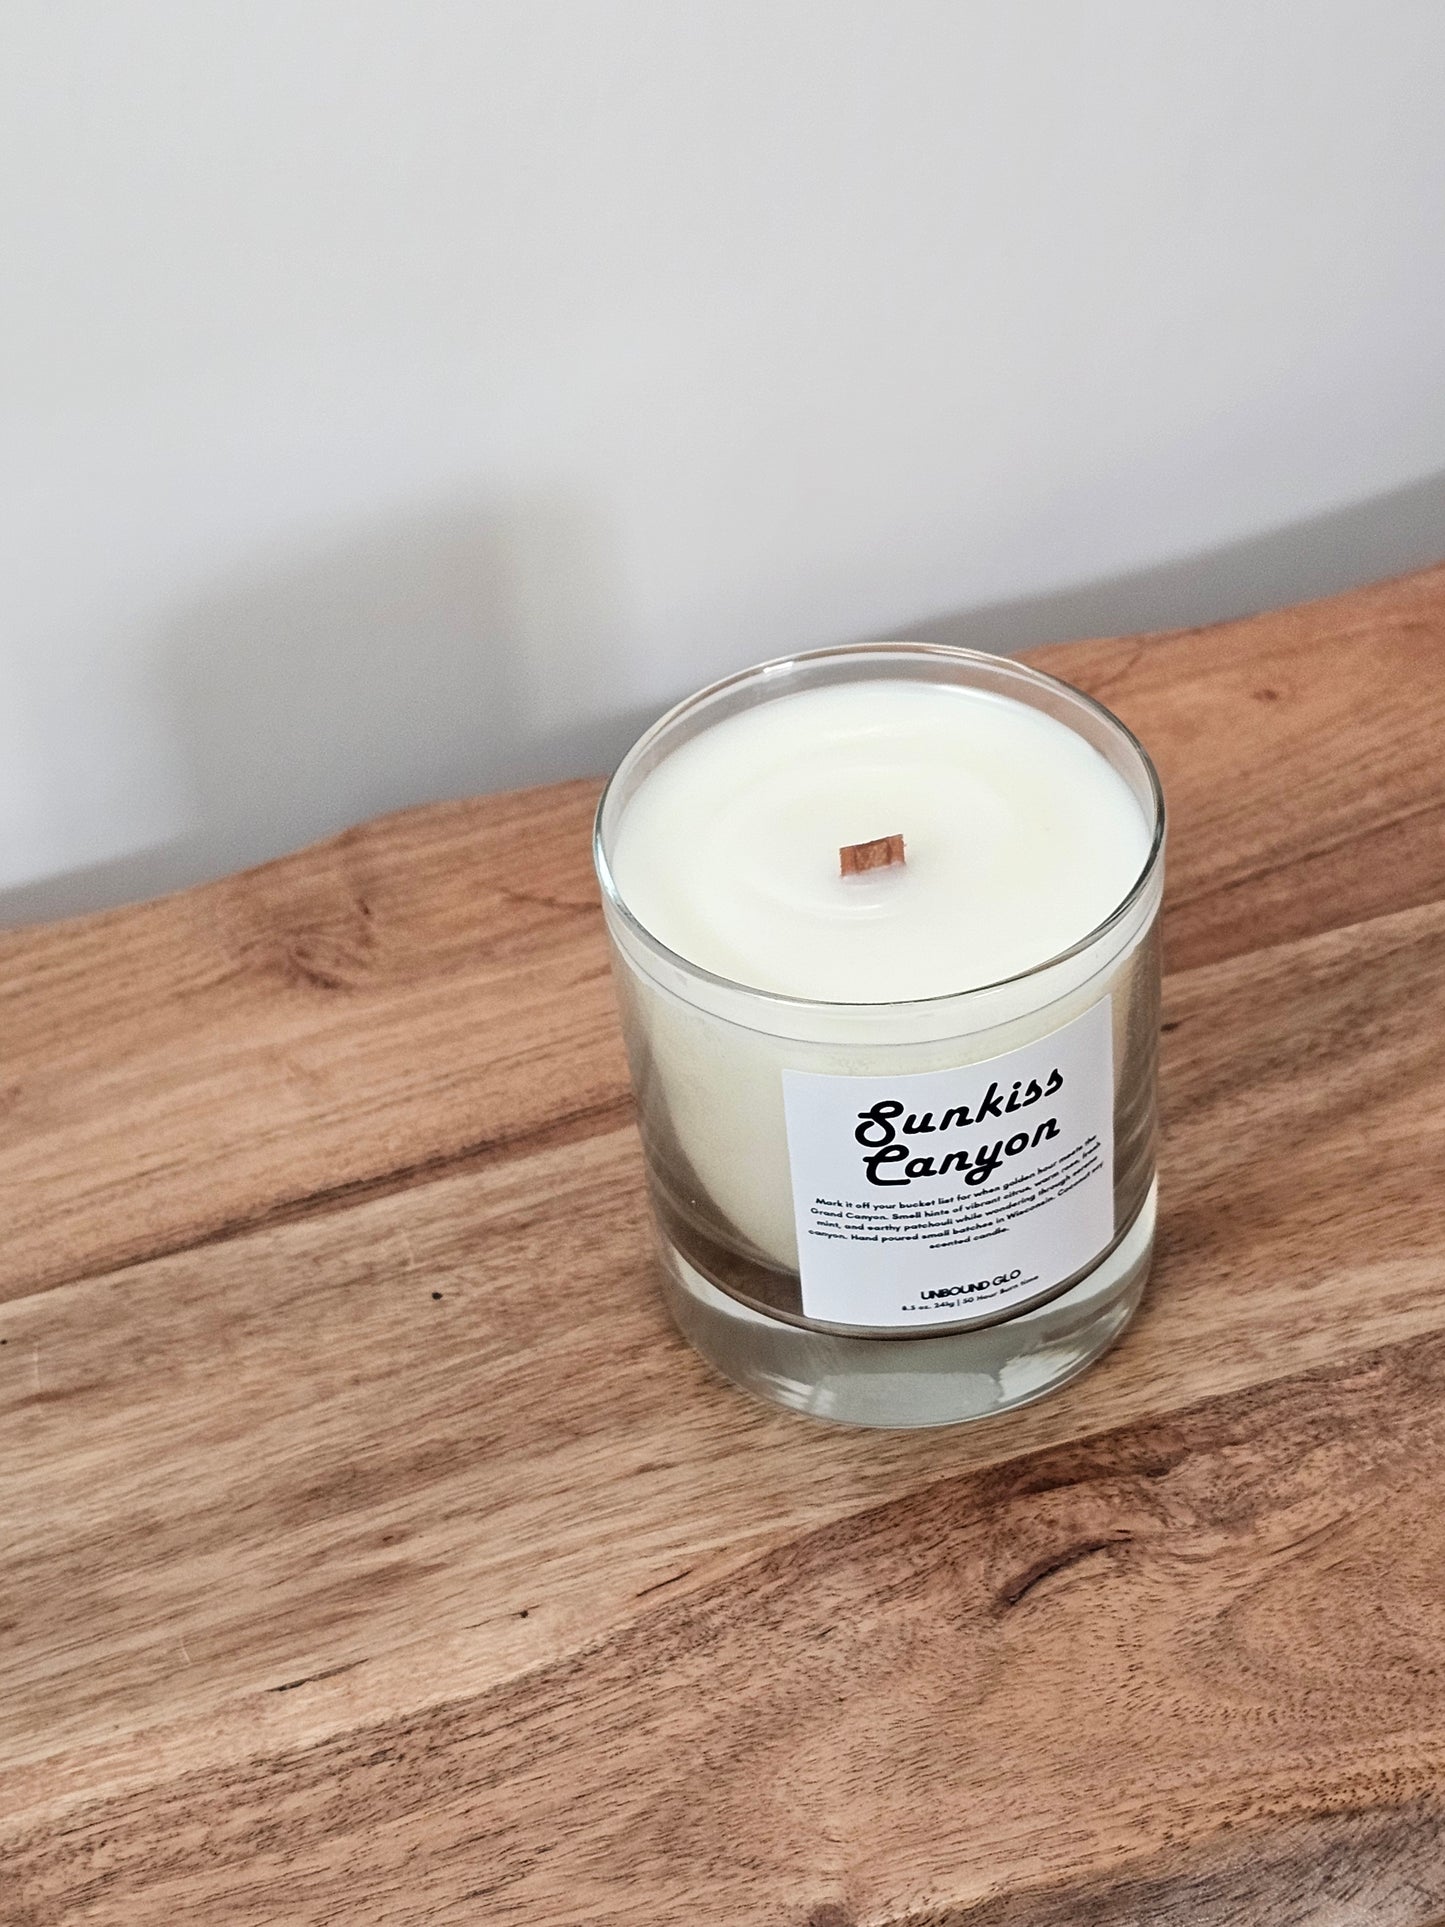 Grand canyon candle that smells like the grand canyon being kissed by the sun with notes of citrus, black pepper, rose, patchouli, and vanilla.